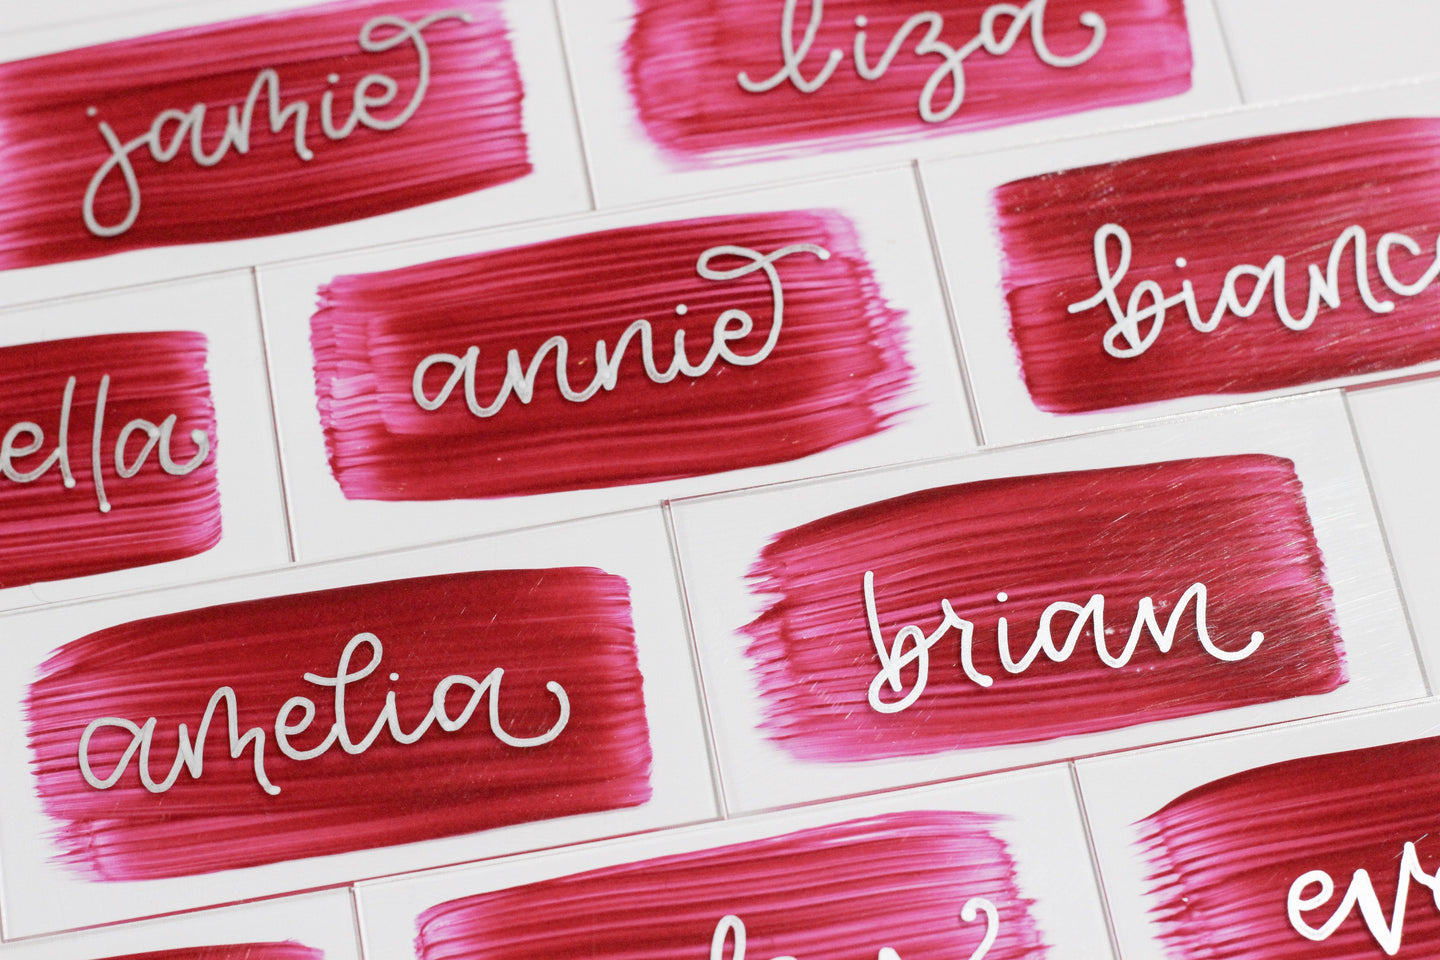 Acrylic place cards with hand-lettered names and rose-coloured painted backs. 